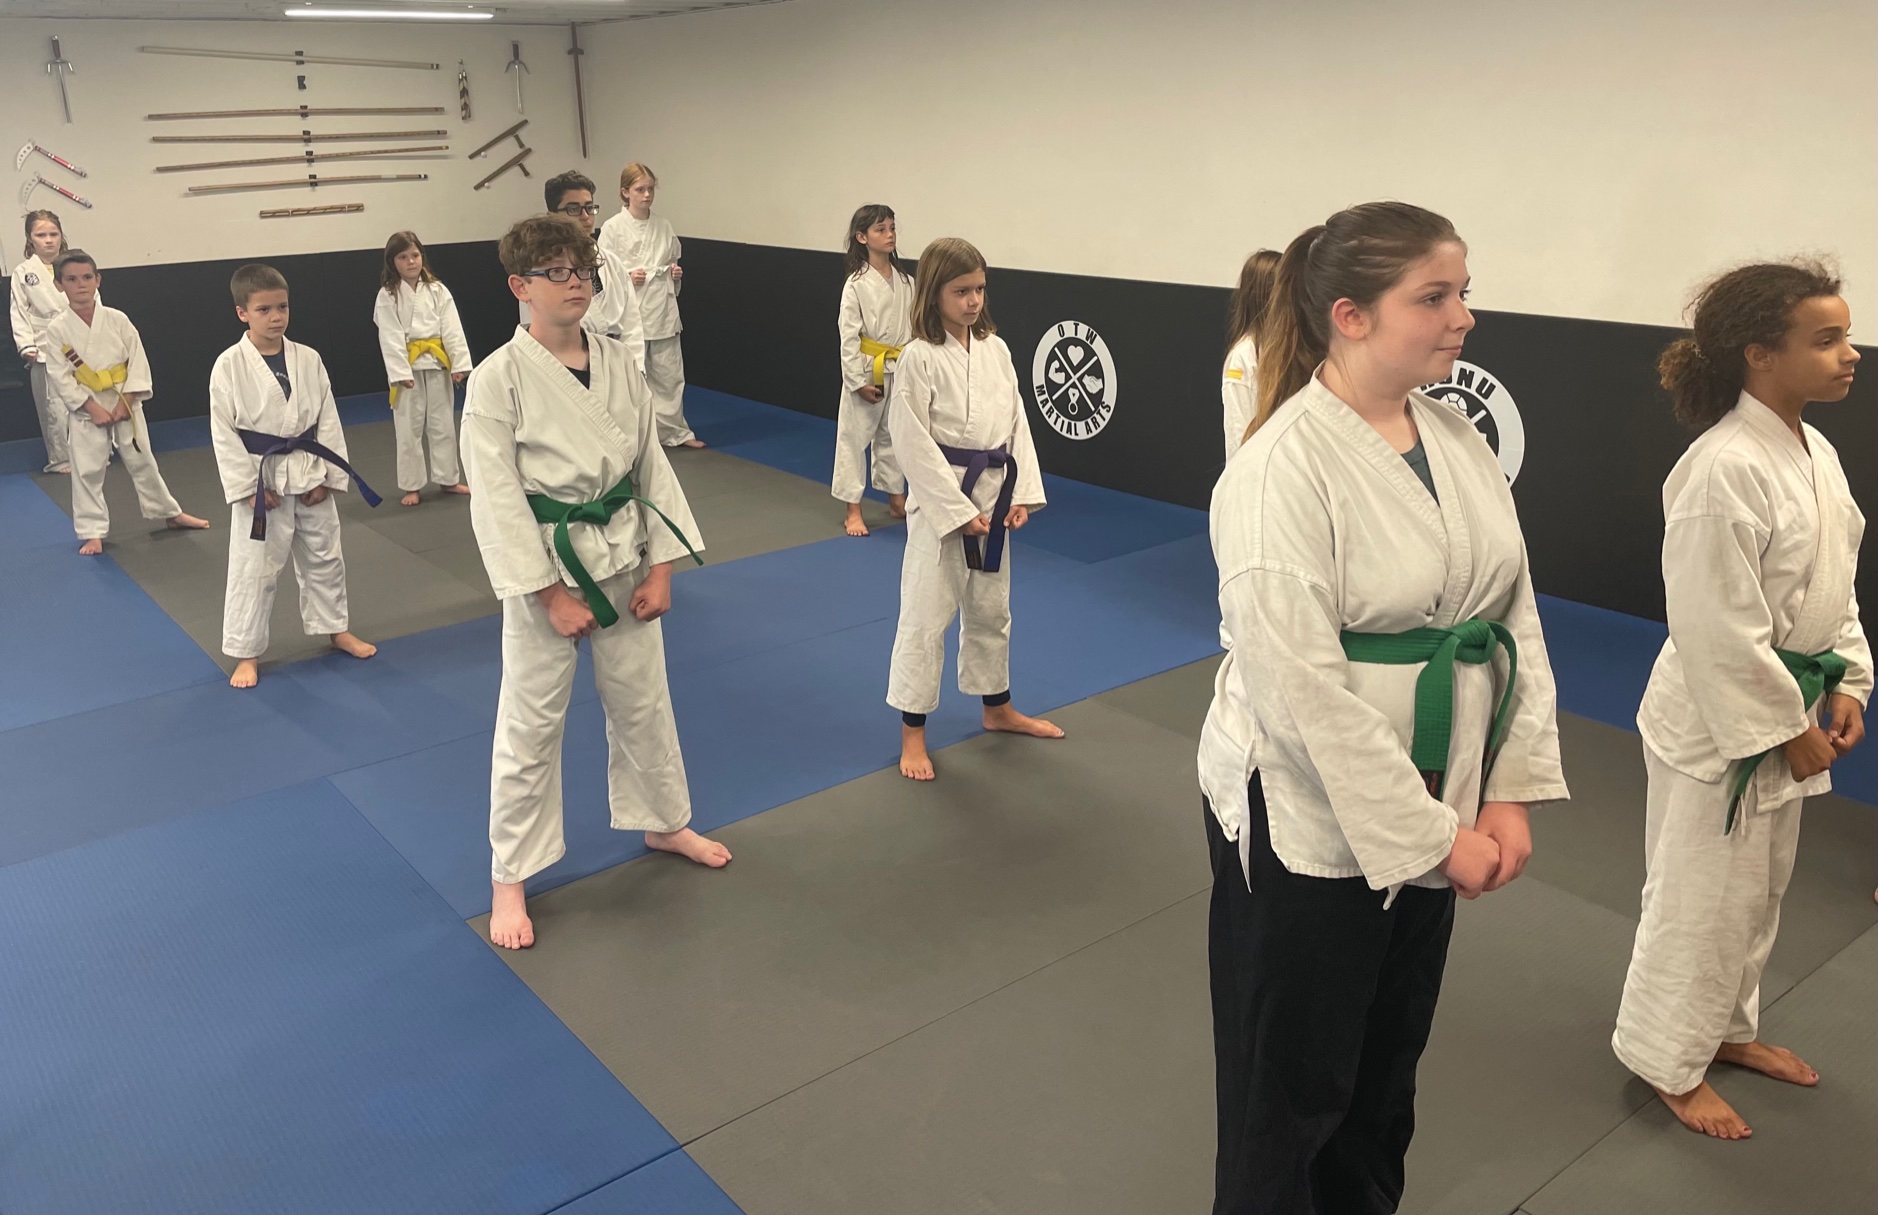 Students preparing for Karate Class